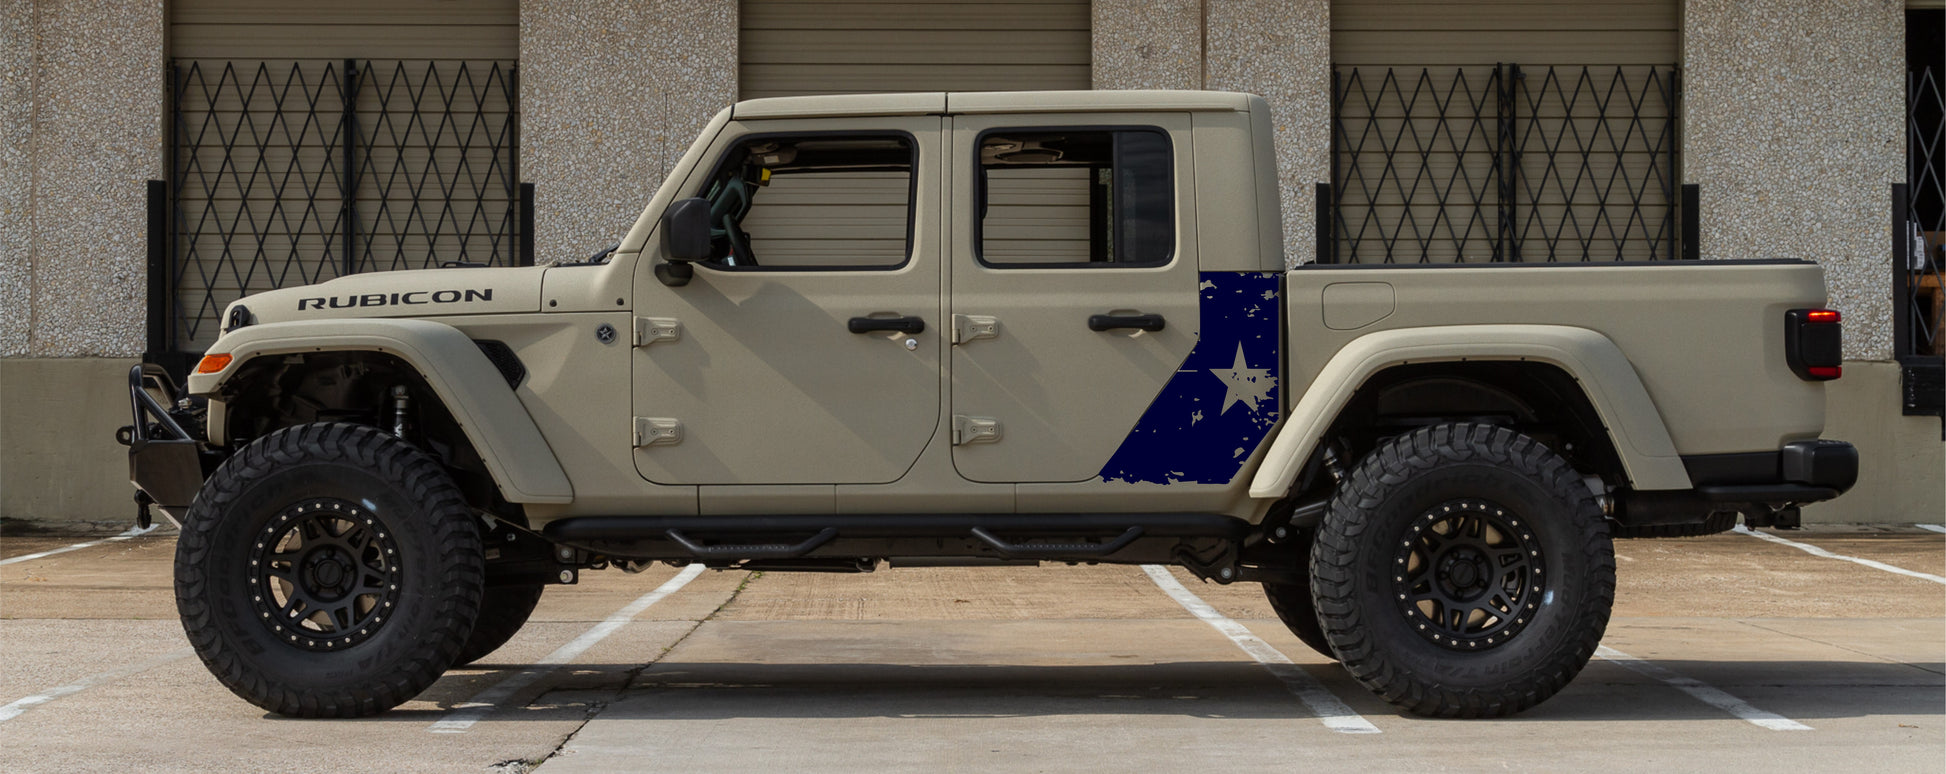 Military Star Decal Stickers For Jeep Gladiator